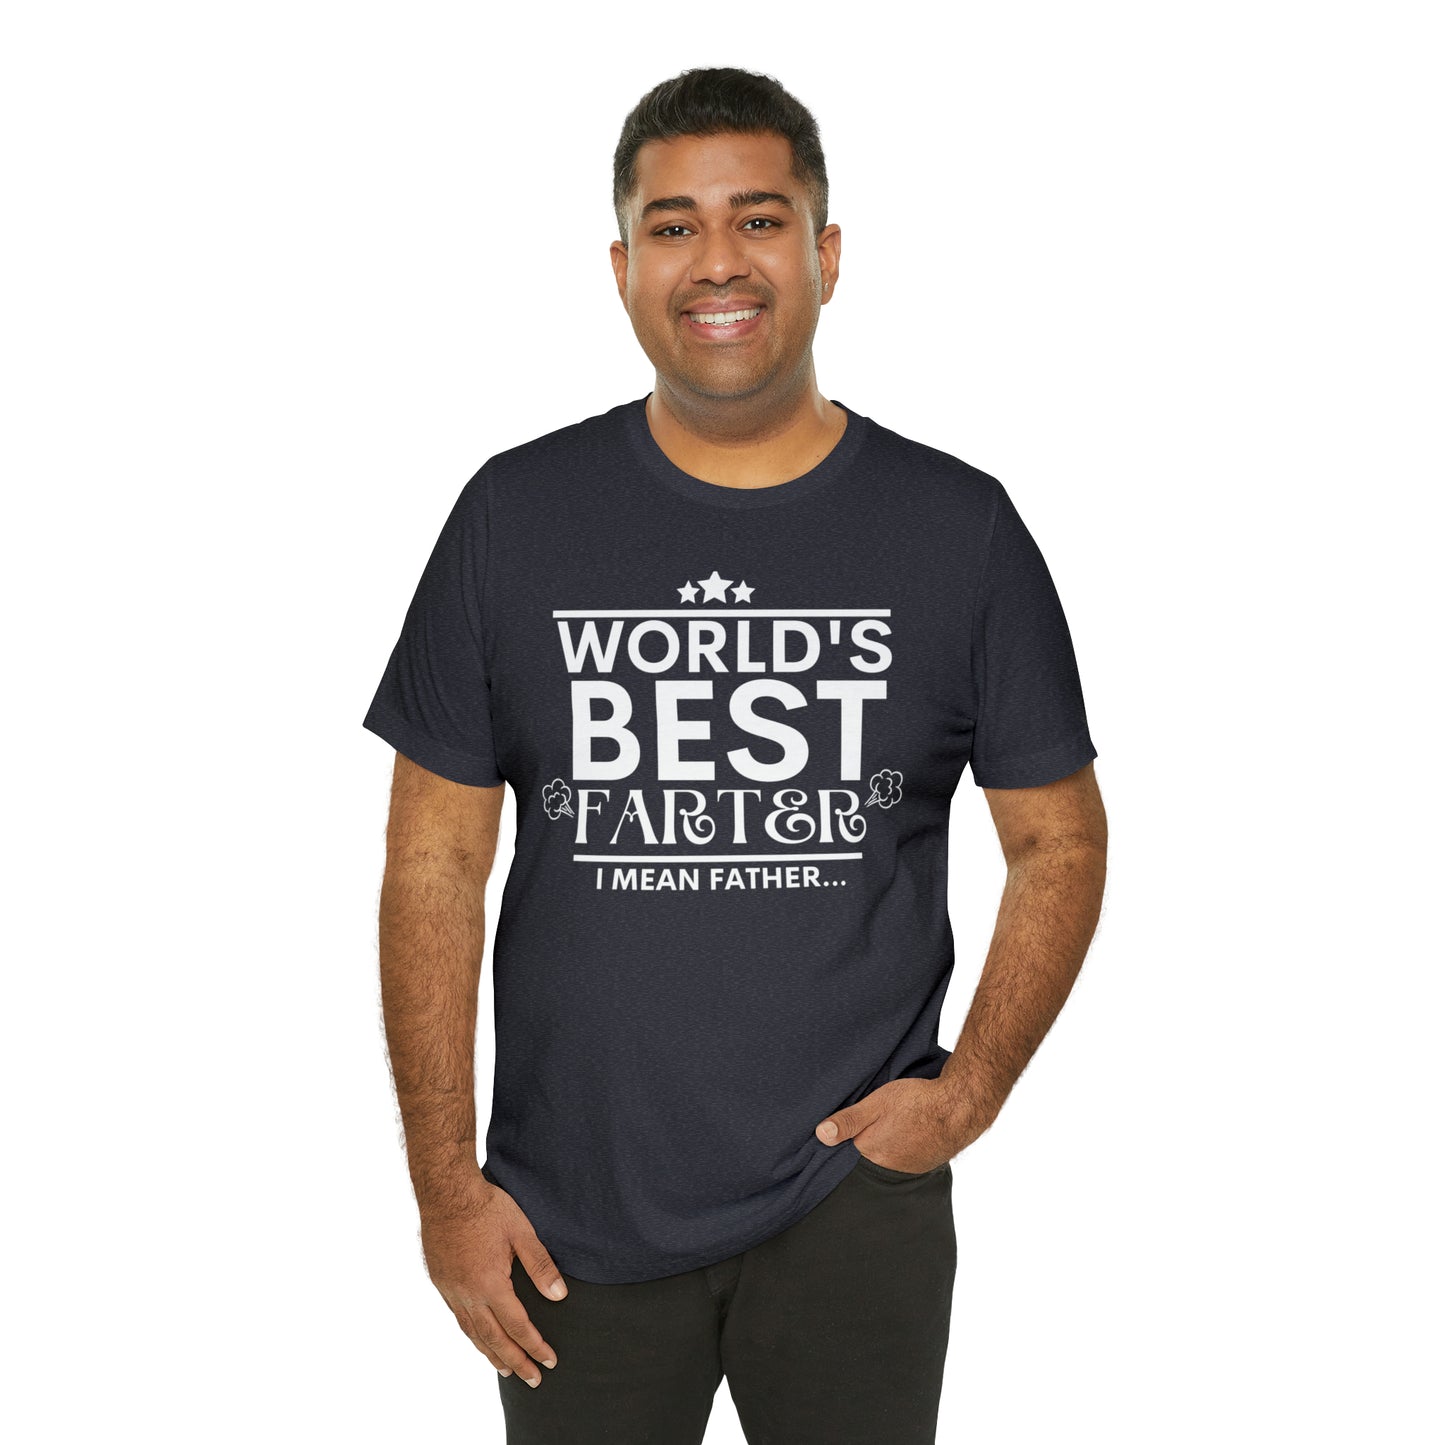 World's Best Farter T-shirt | Funny Dad T-shirt, Father's Day Gift, T-shirt For Dad, Best Dad Tee, Husband T-shirt, Funny Men's Shirt